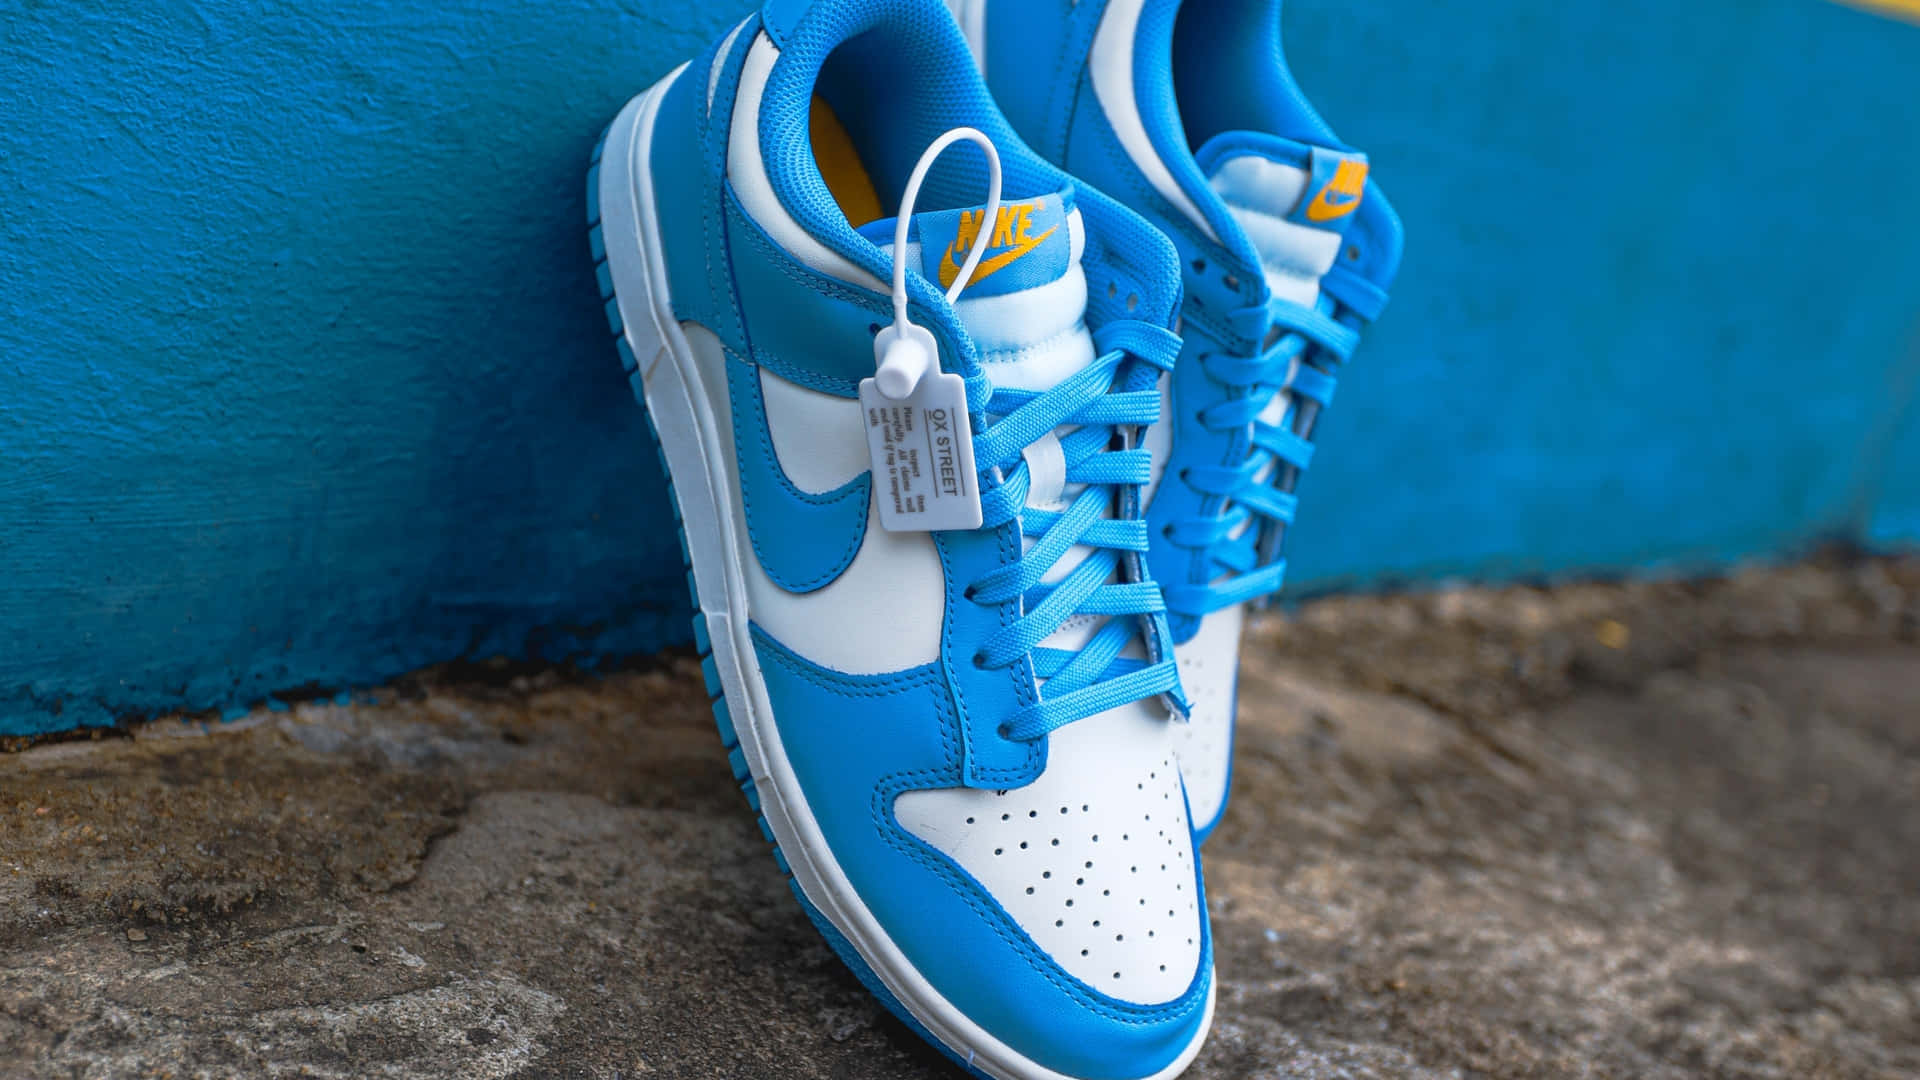 Blueand White Sneakers Against Blue Wall Wallpaper